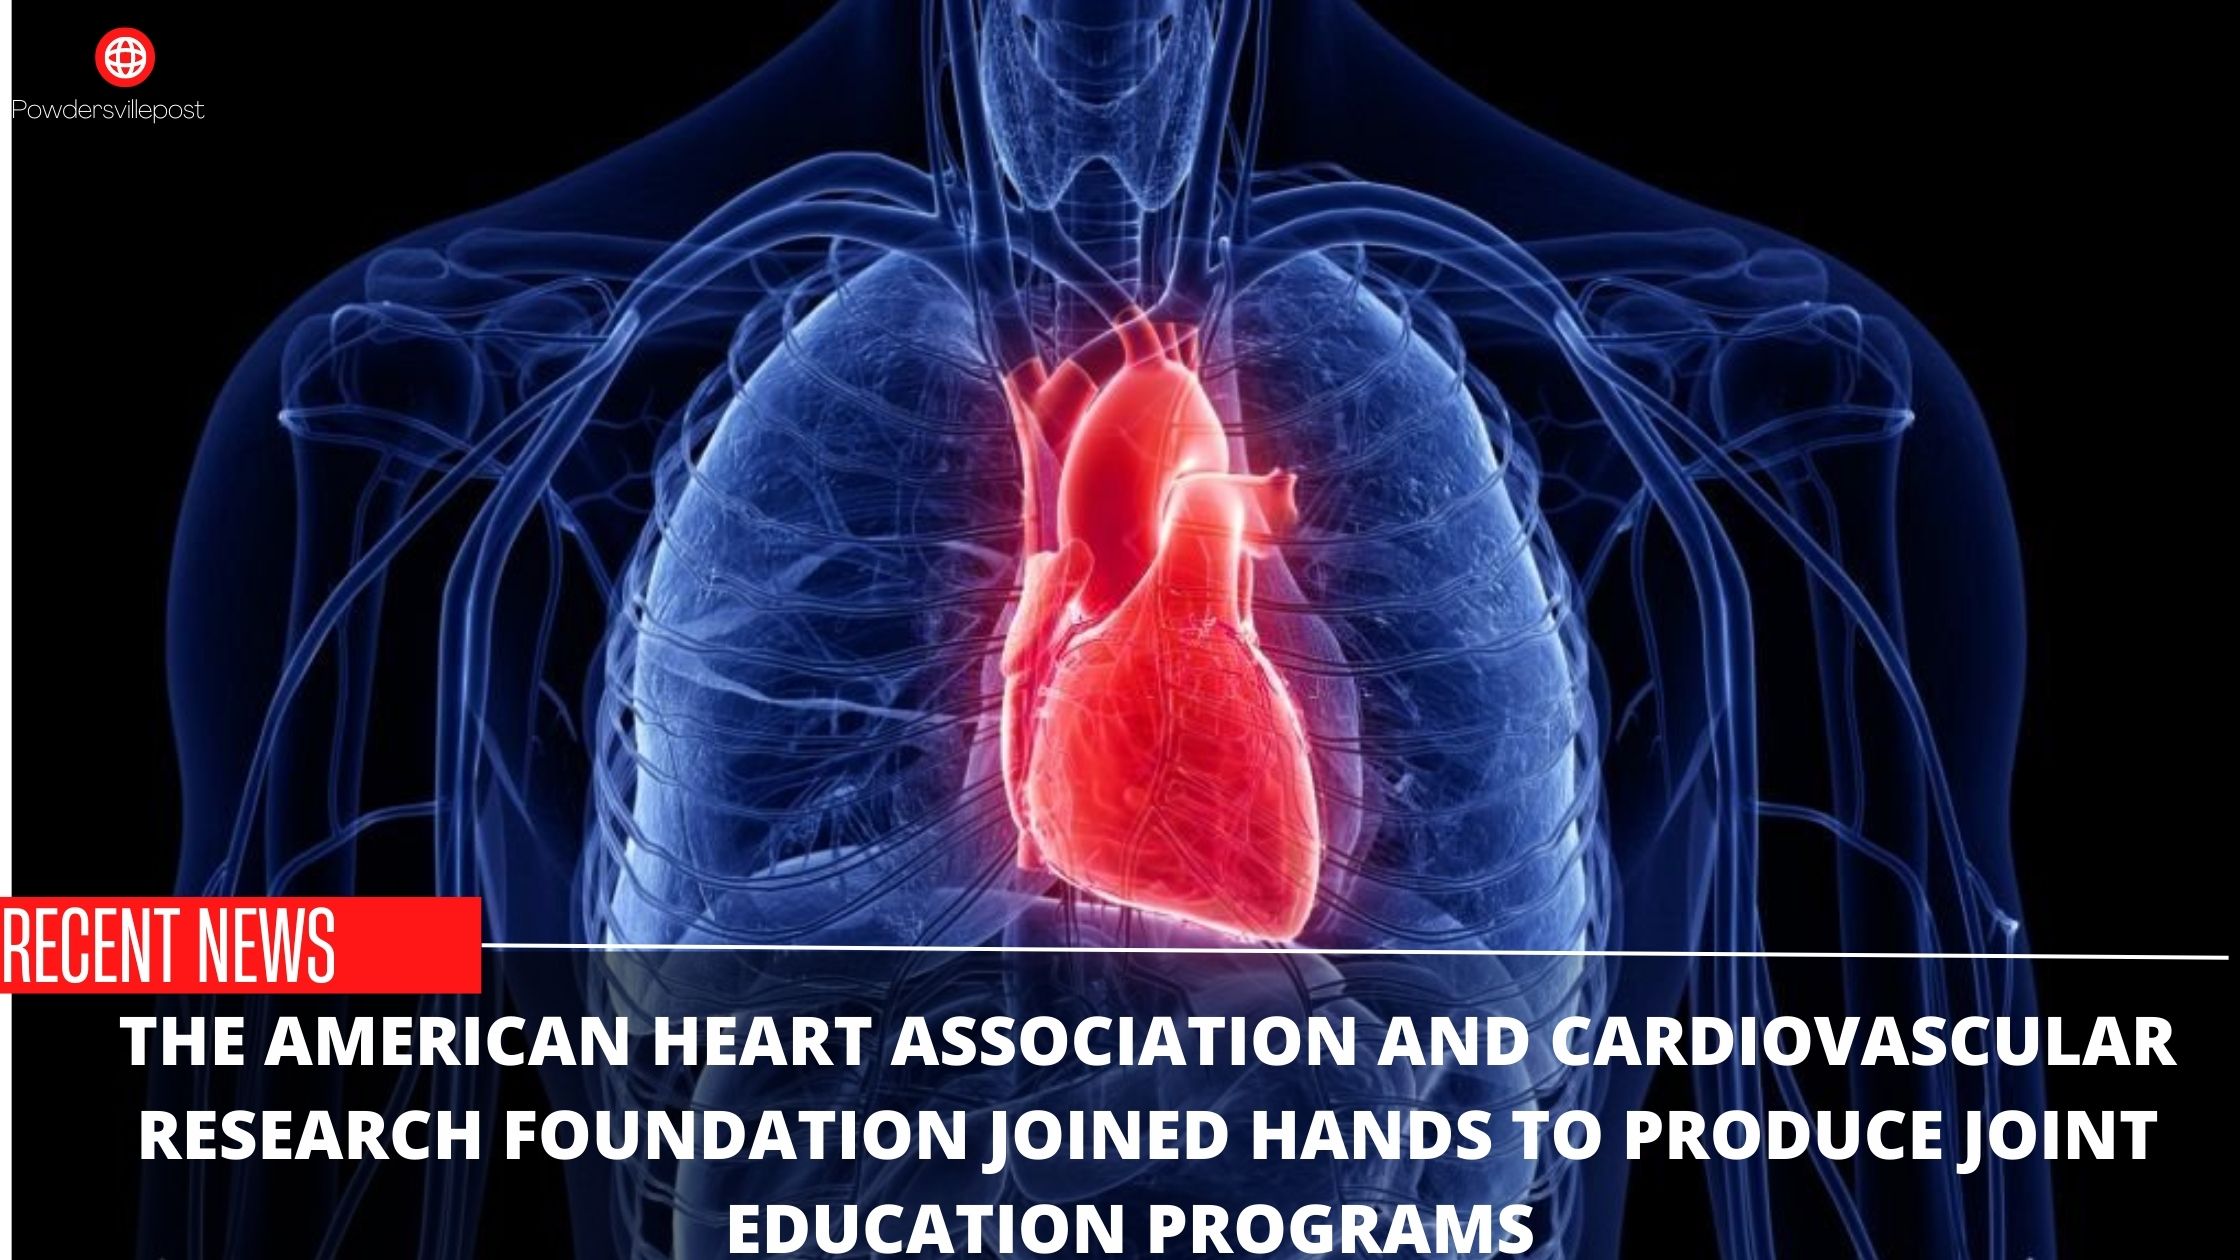 The American Heart Association and Cardiovascular Research Foundation Joined Hands to produce joint education programs